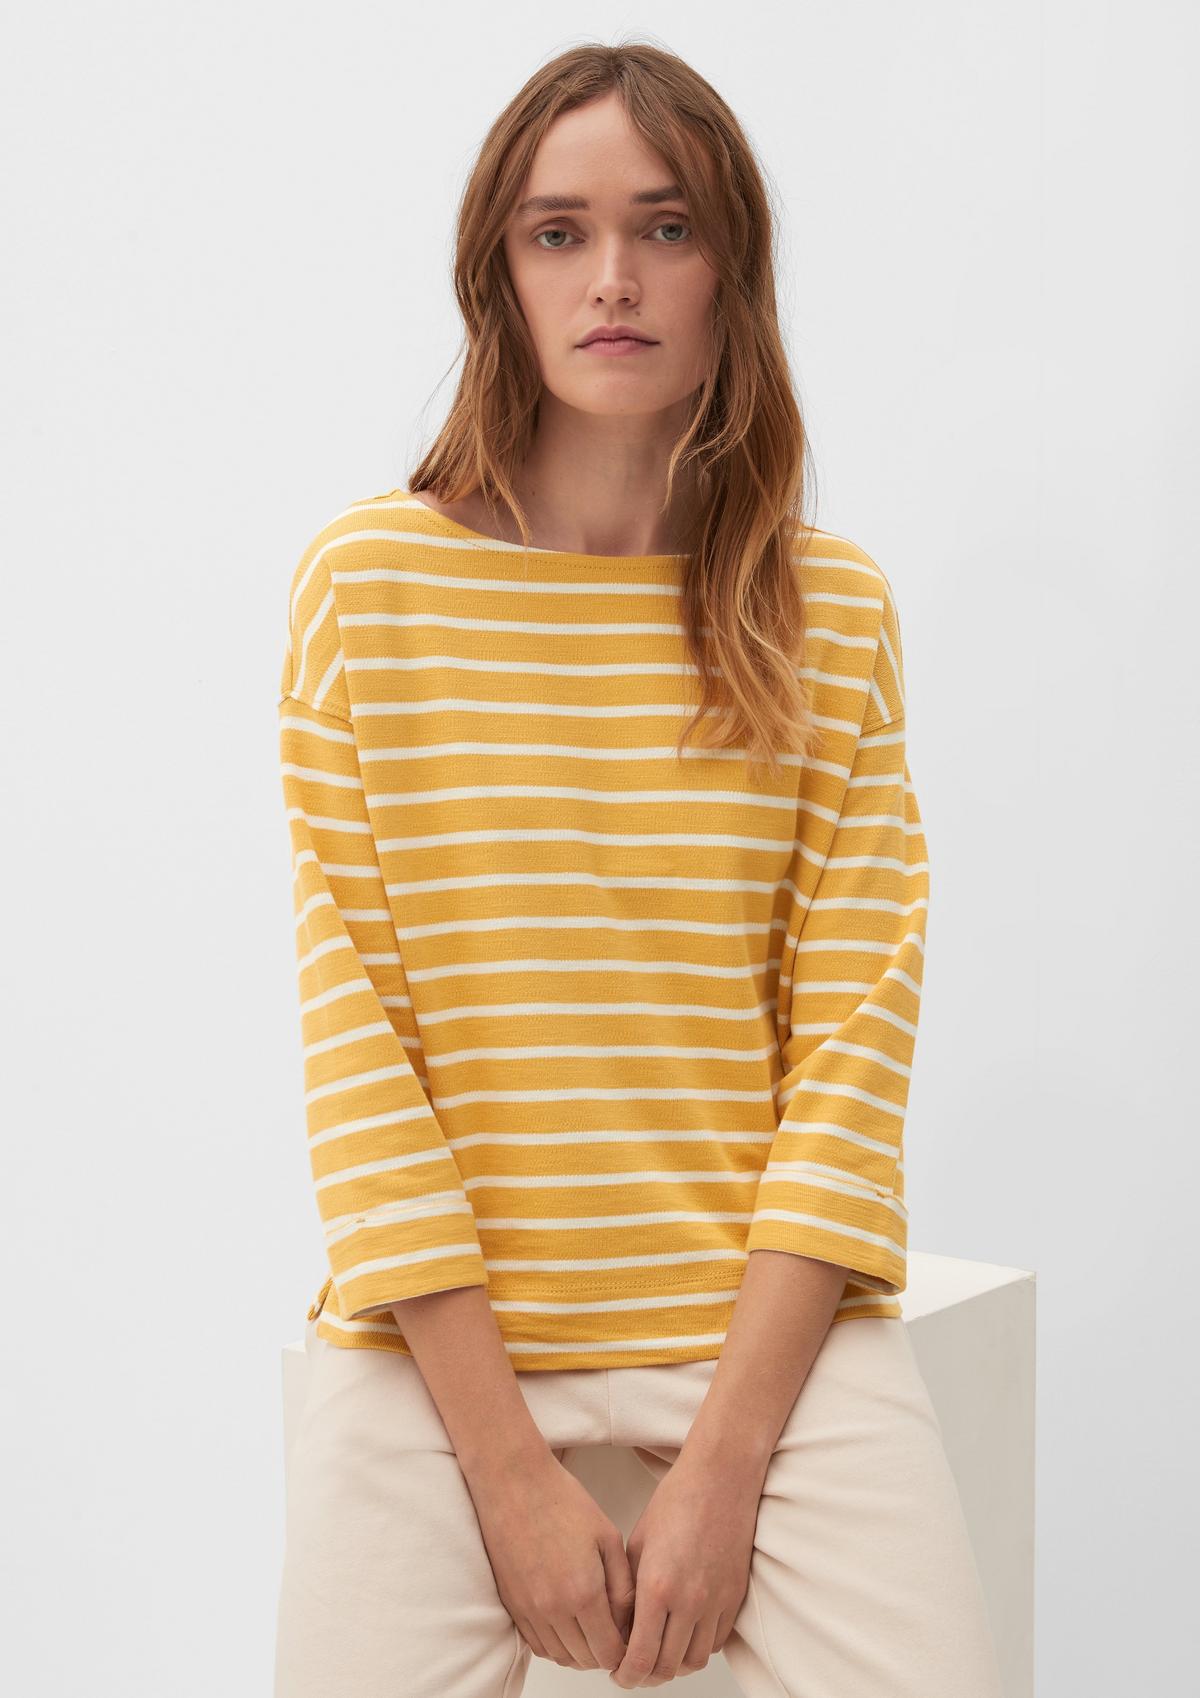 s.Oliver Striped top with woven texture